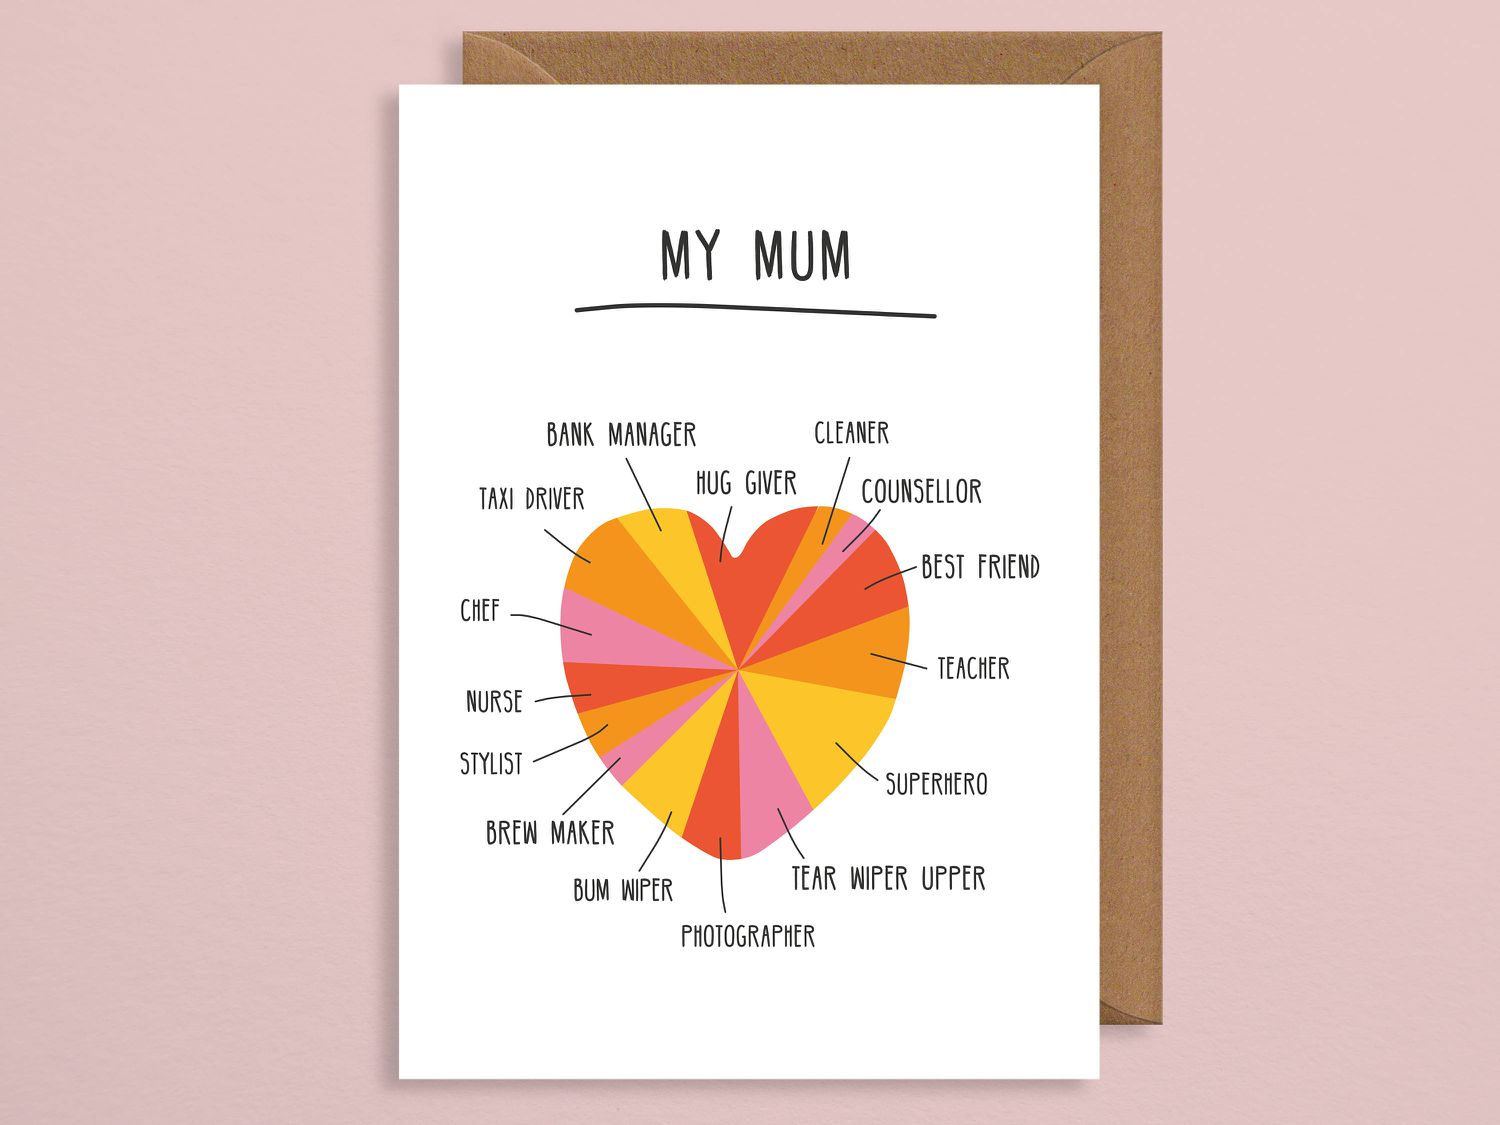 mother's day card has heart diagram divided into sections labeled bank manager, bum wiper, photographer, taxi driver, hug giver, cleaner, counsellor, best friend, teacher, nurse, stylist